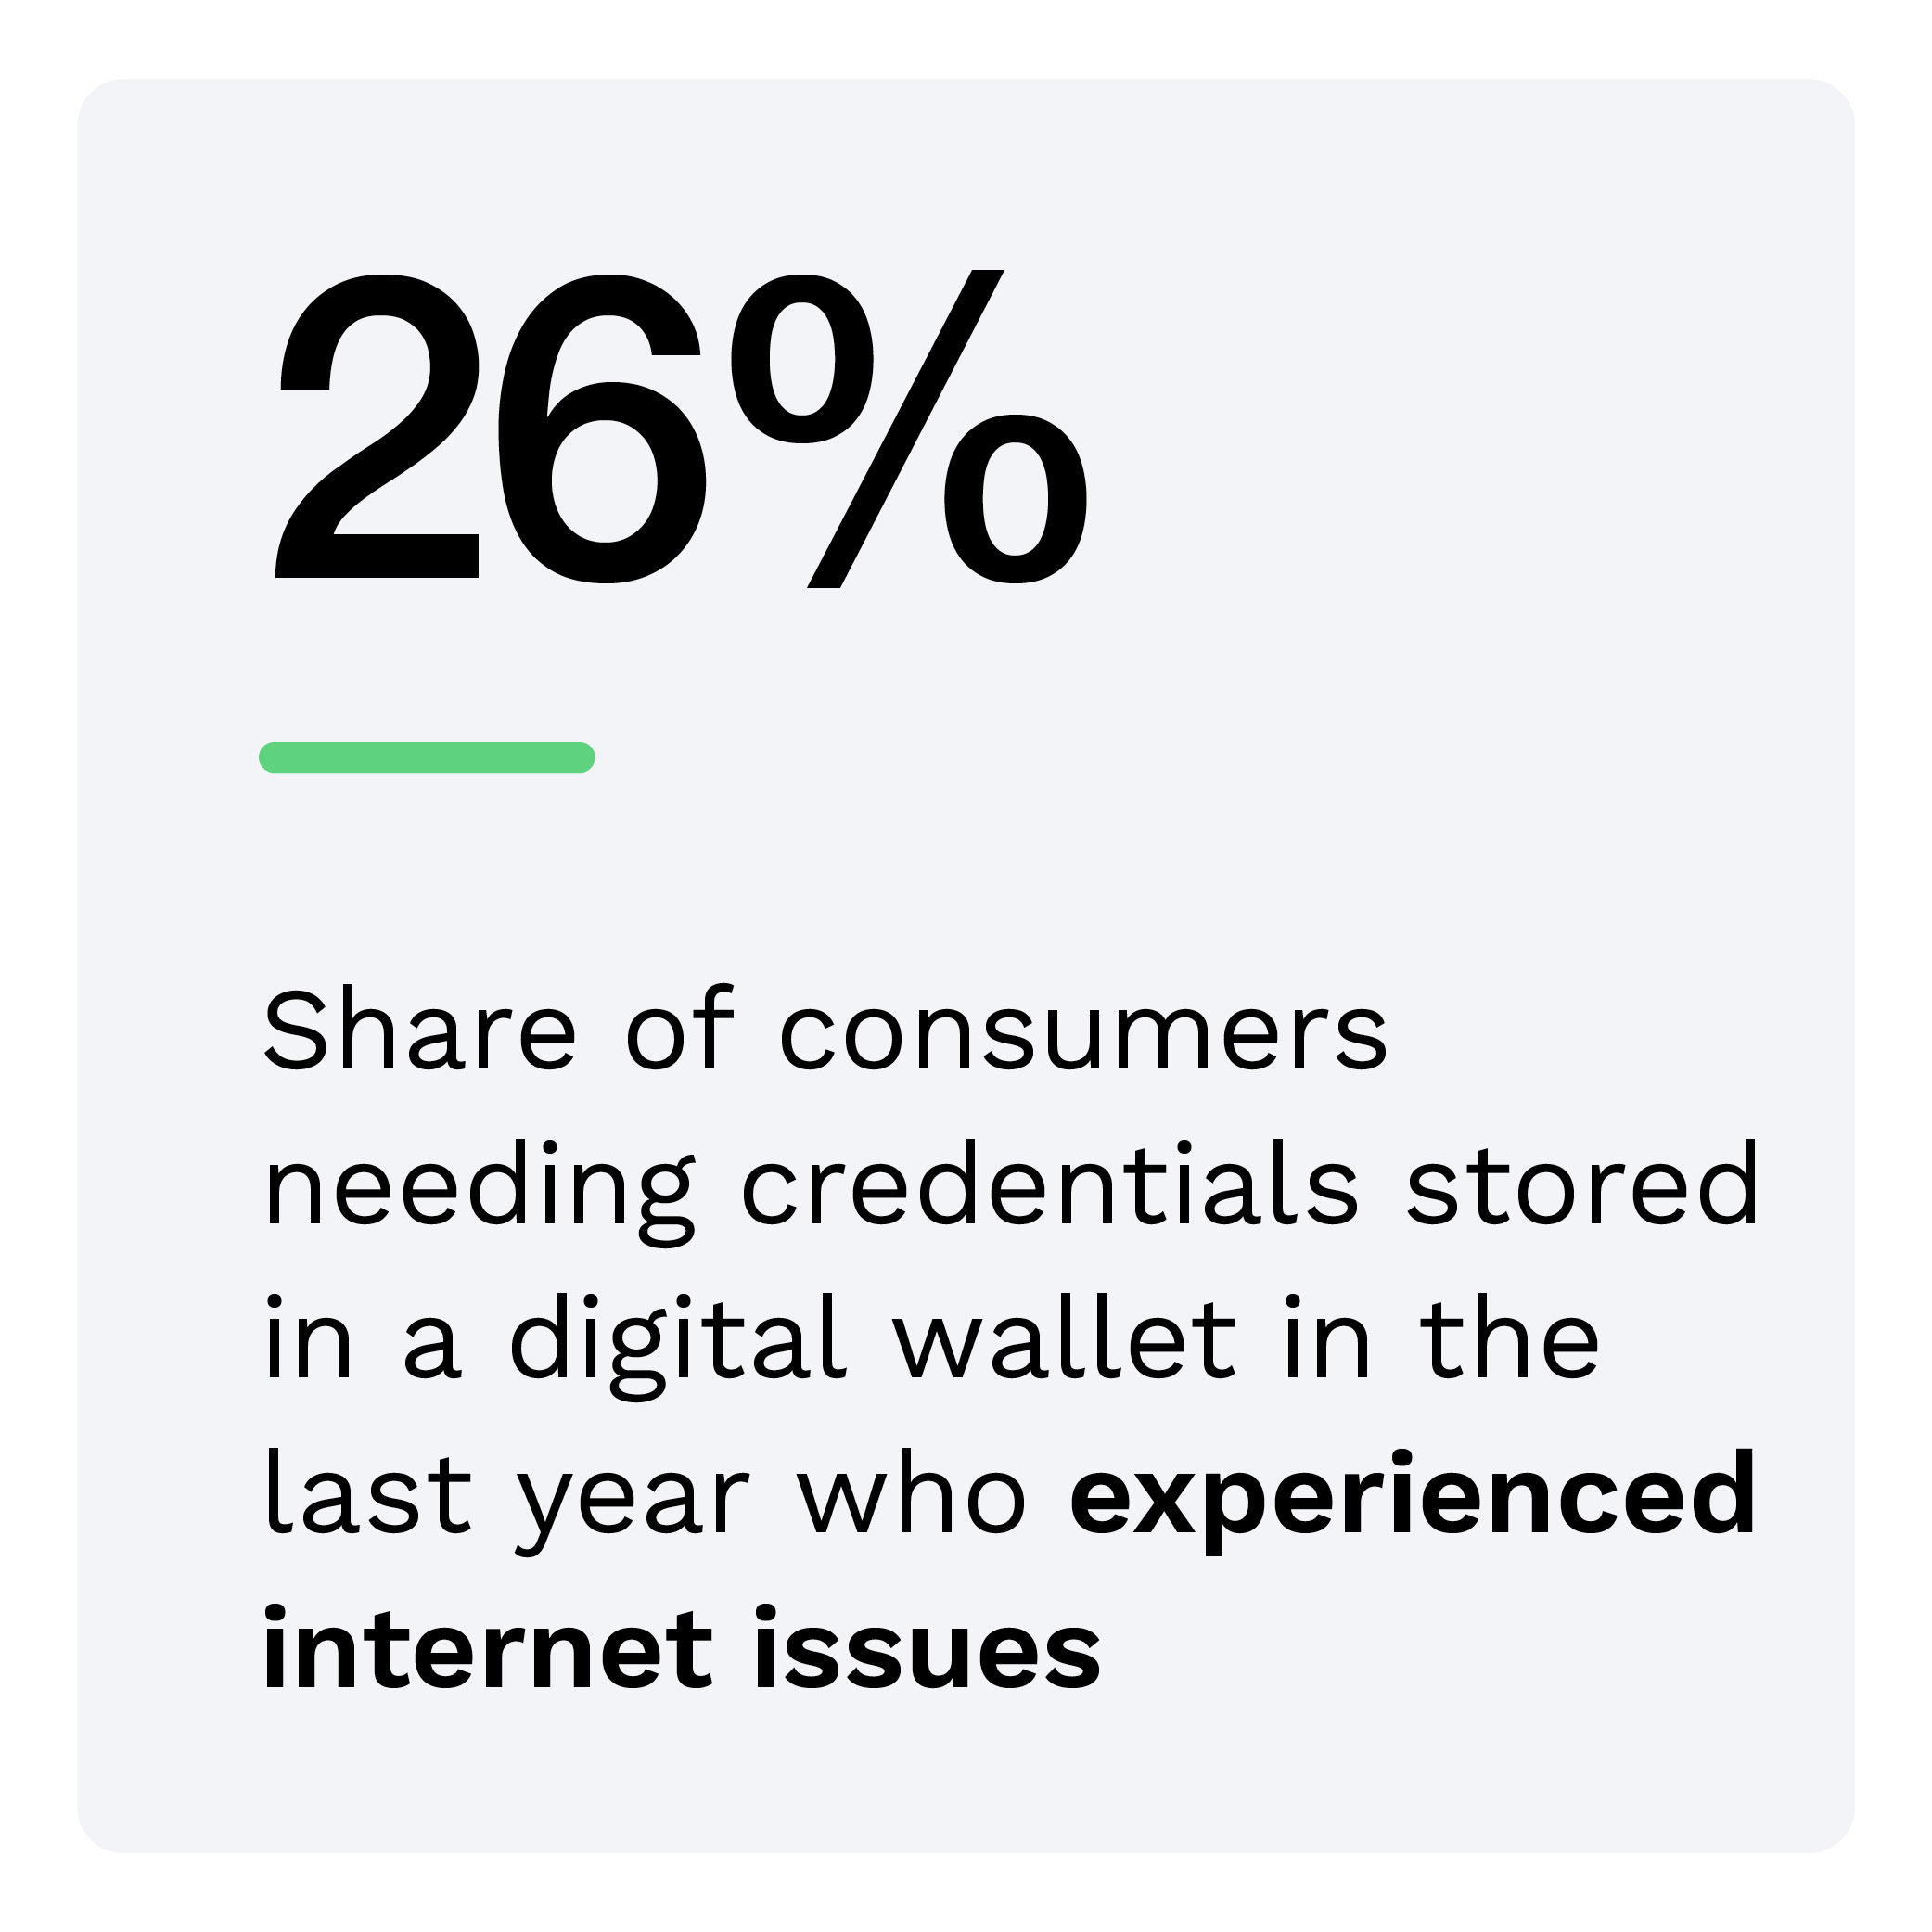 26%: Share of consumers needing credentials stored in a digital wallet in the last year who experienced internet issues